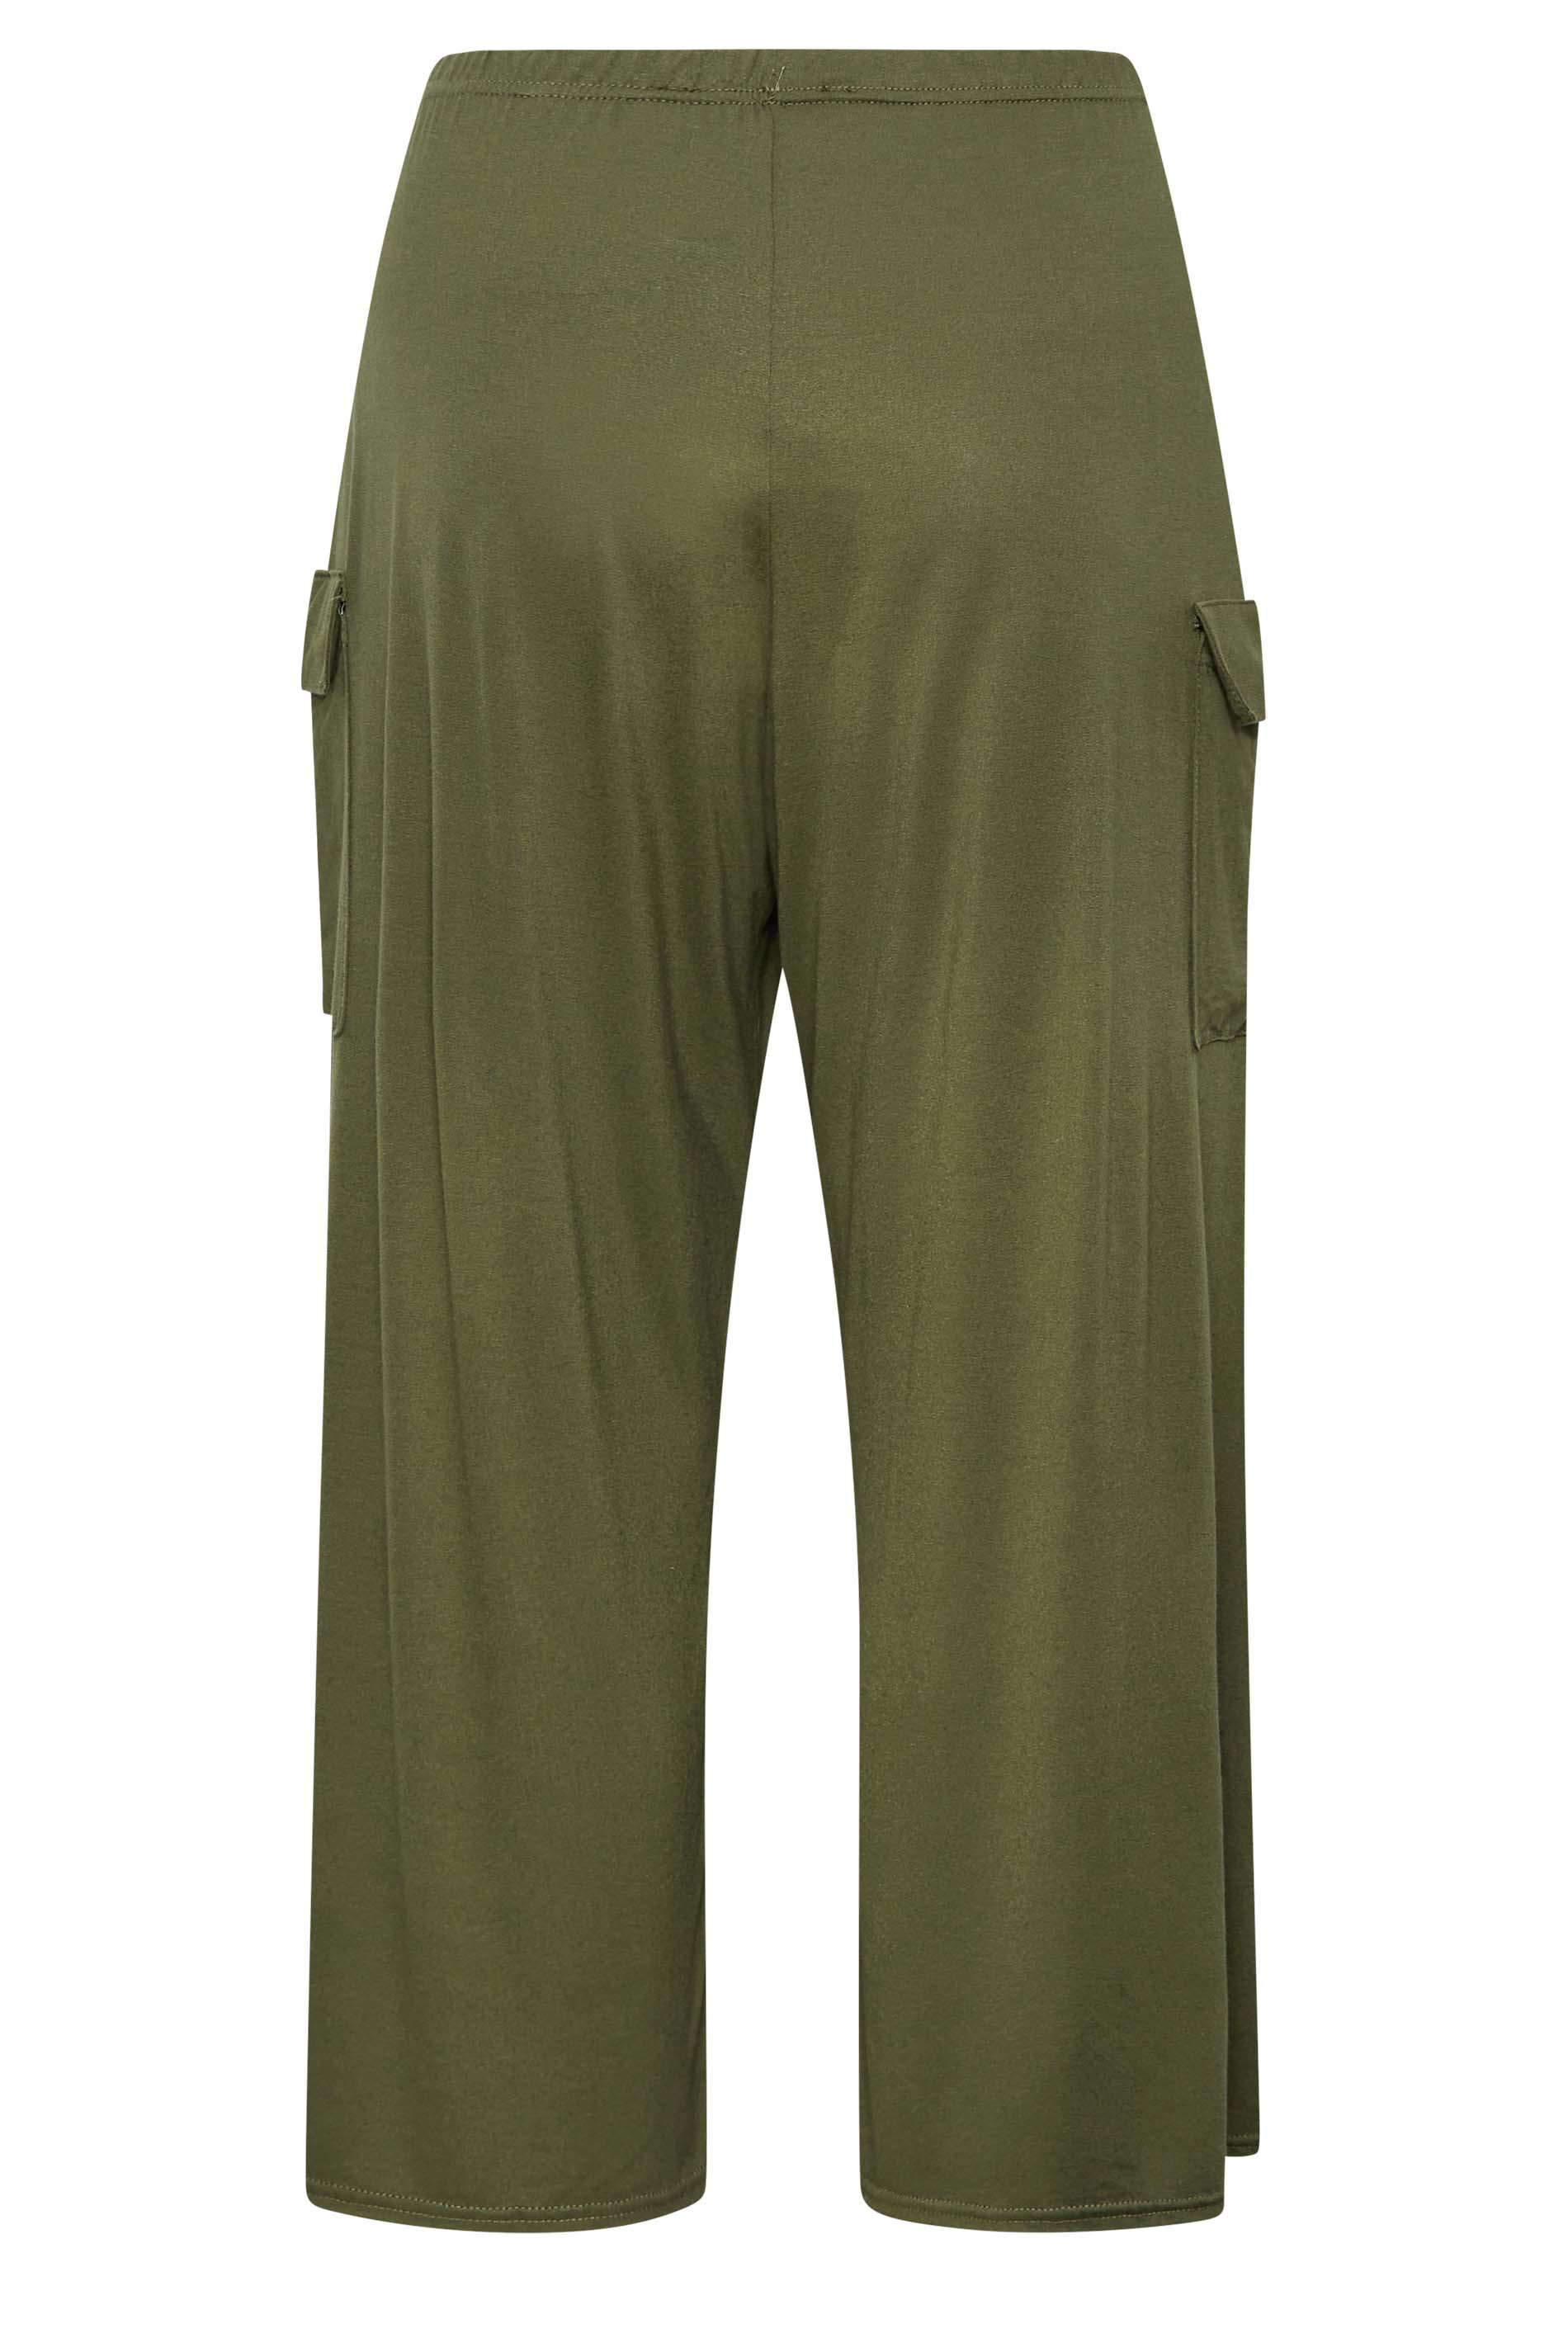 YOURS Curve Plus Size Khaki Green Wide Leg Cargo Trousers | Yours Clothing